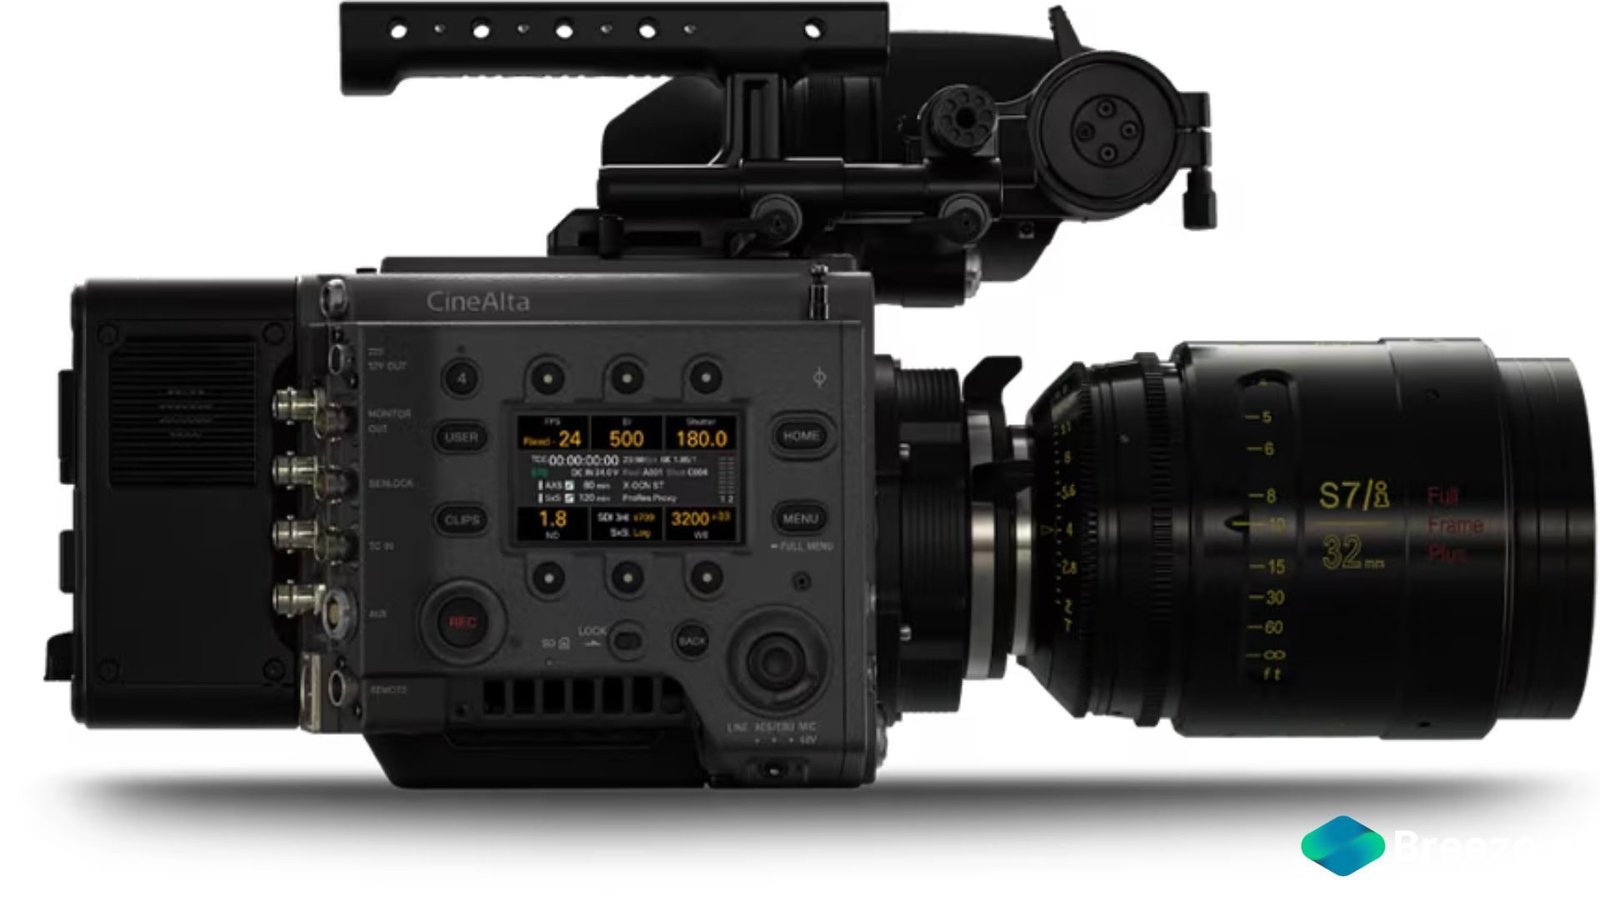 Rent Sony VENICE Digital Motion Picture Camera in Delhi NCR, Camera lenses for rent, Camera accessories, in Delhi Gurgaon Noida, hire Shooting equipment, Lighting equipment rental, Film gear rental for Video production, camera rental company in Delhi, film equipment rental company